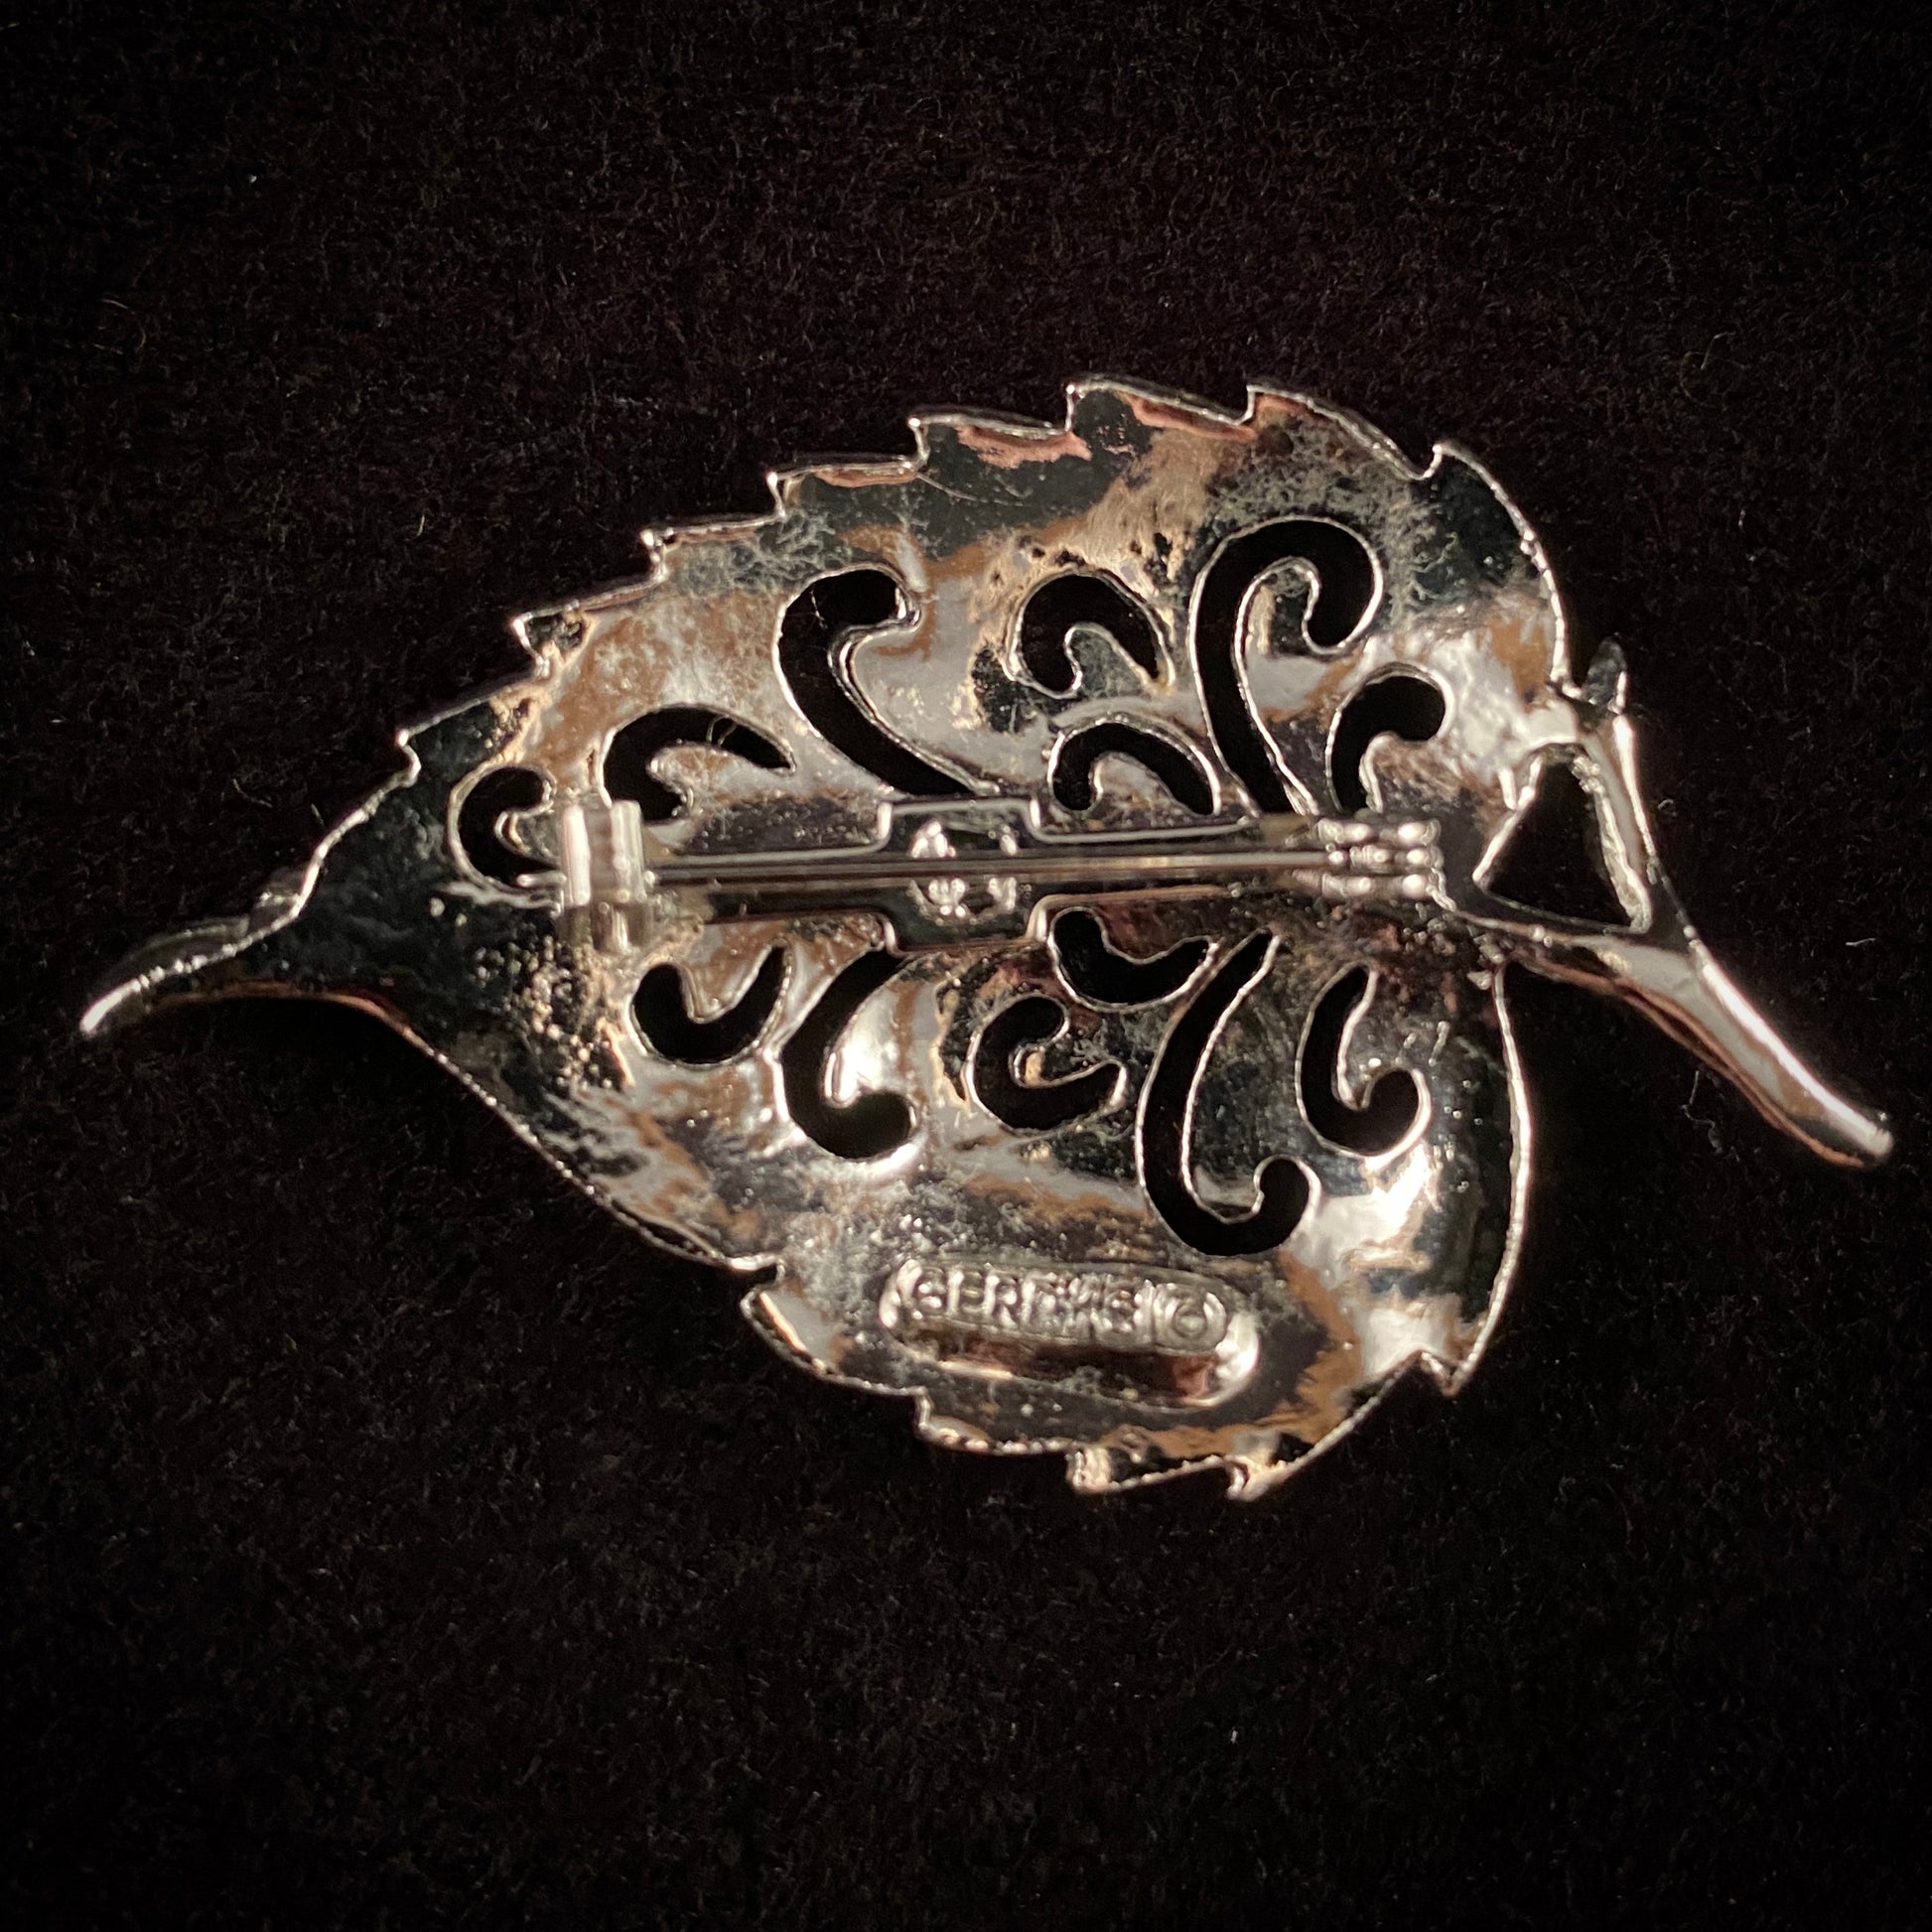 Late 50s/ Early 60s Gerry's Silver Leaf Brooch - Retro Kandy Vintage